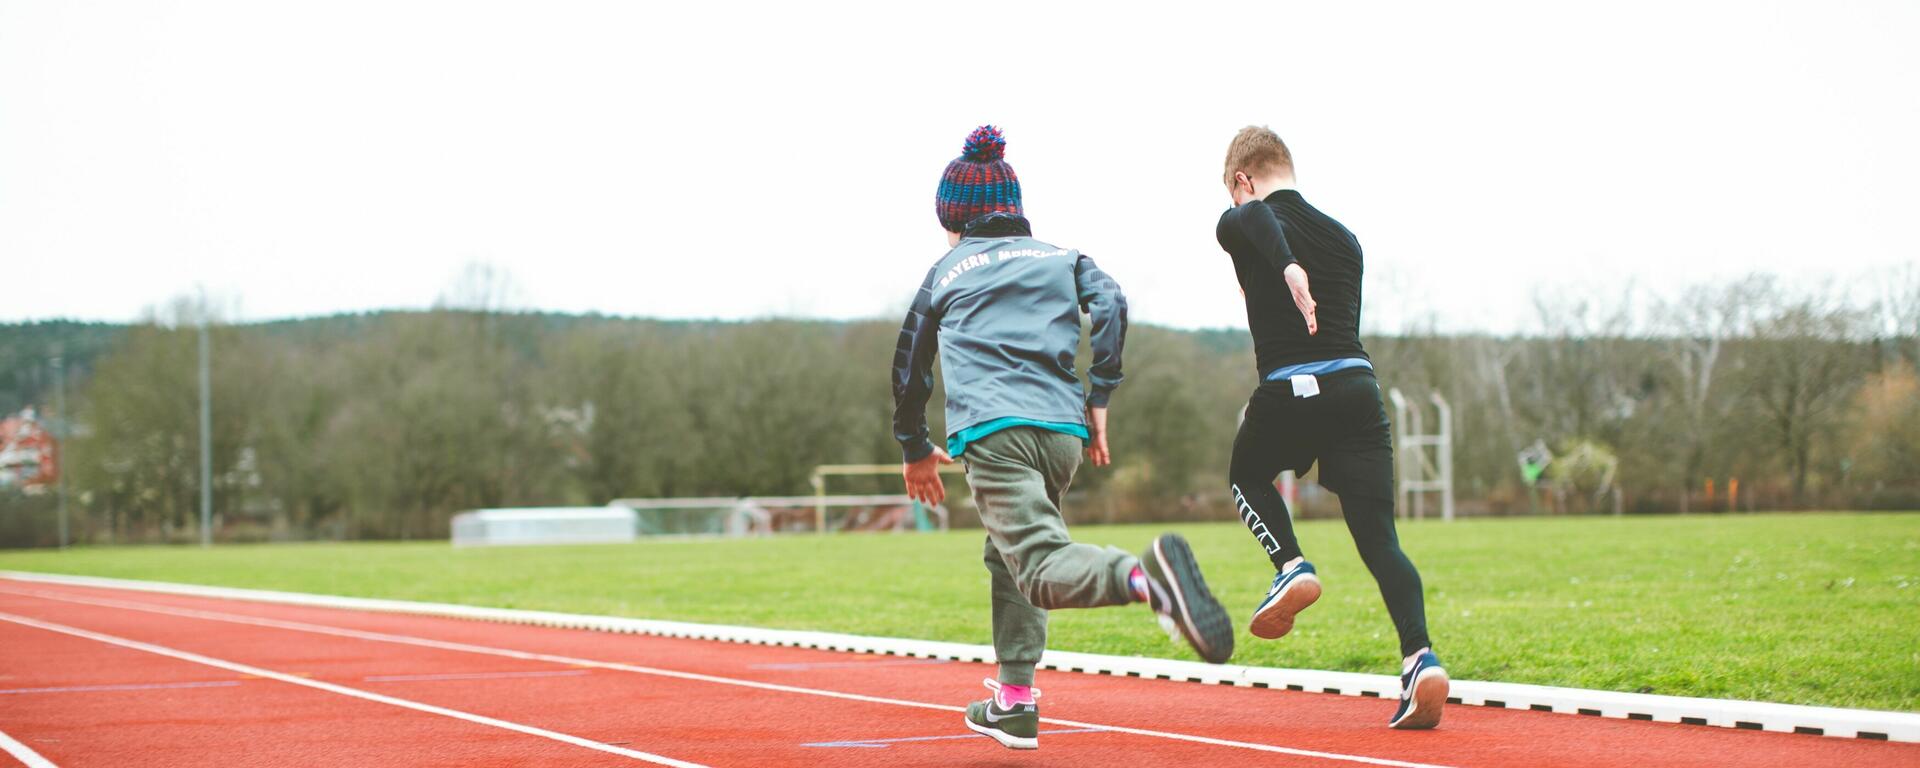 kids running on the track 